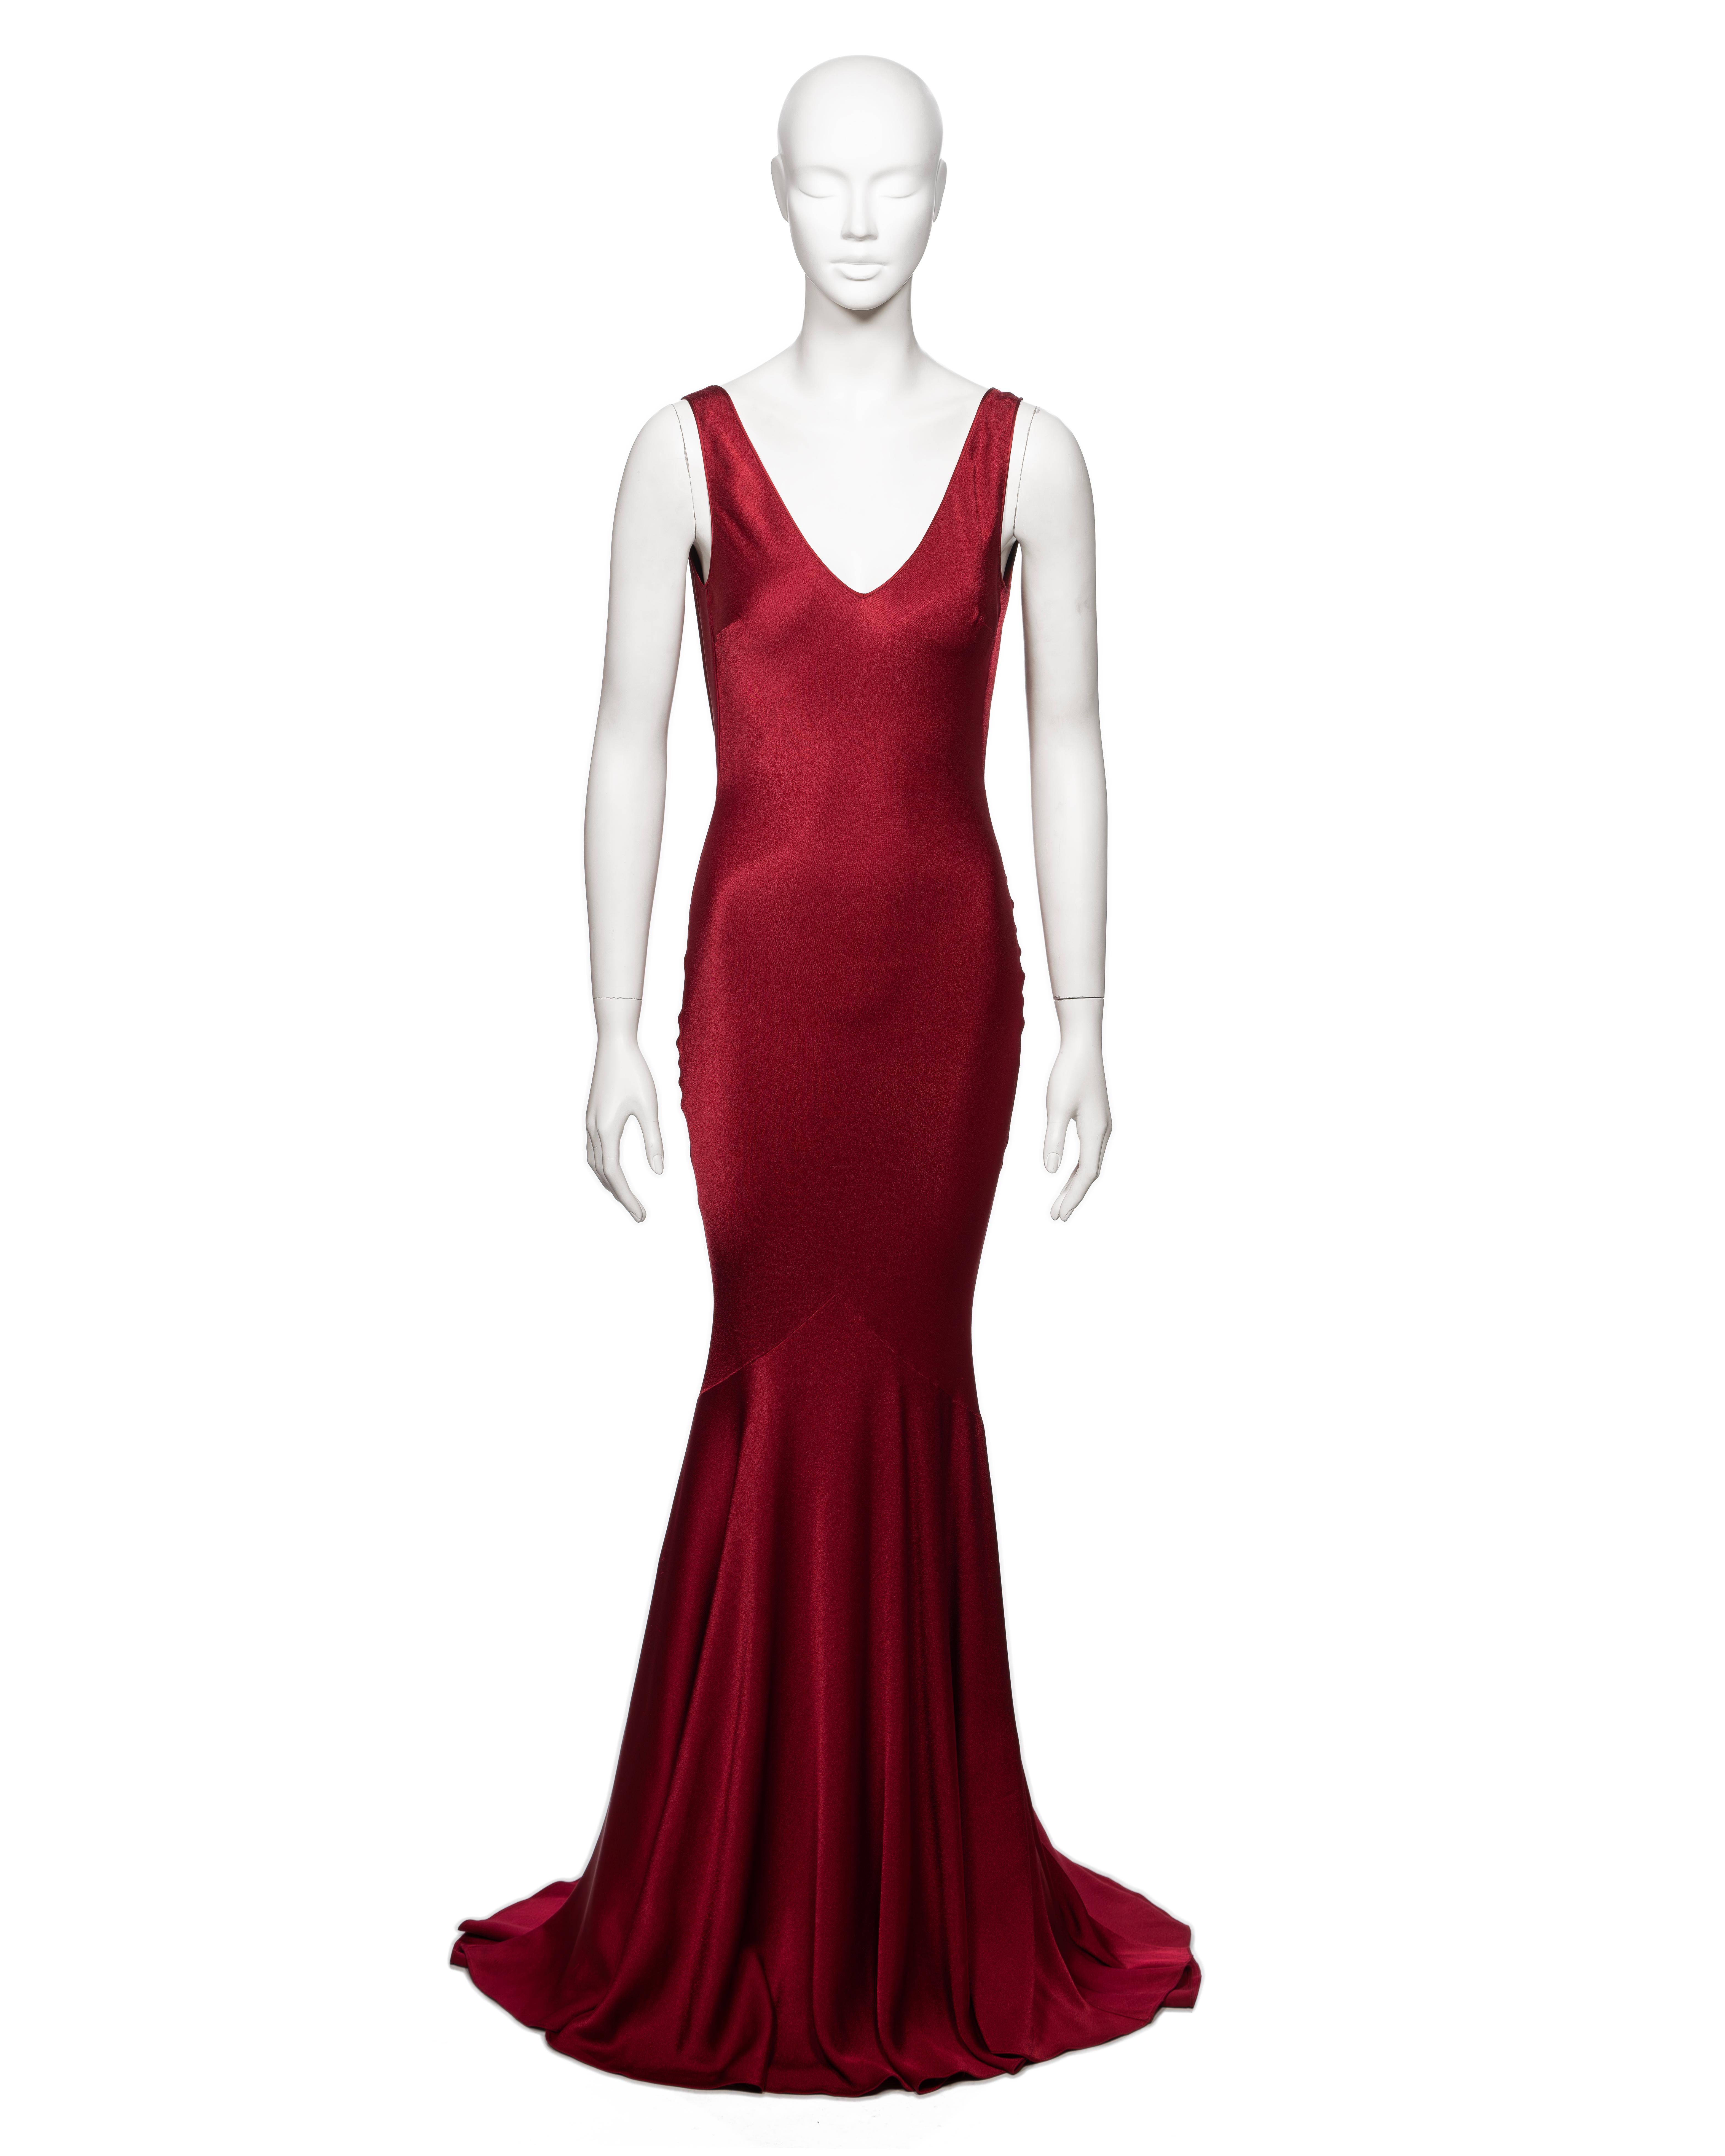 ▪ Brand: John Galliano
▪ Creative Director: John Galliano
▪ Collection: Fall-Winter 2001
▪ Fabric: Red crêpe-backed satin, 68% Acetate, 32% Viscose
▪ Details: V-neck, low back with cowl, floor-length flared skirt with train
▪ Size: FR38 - UK10 
▪